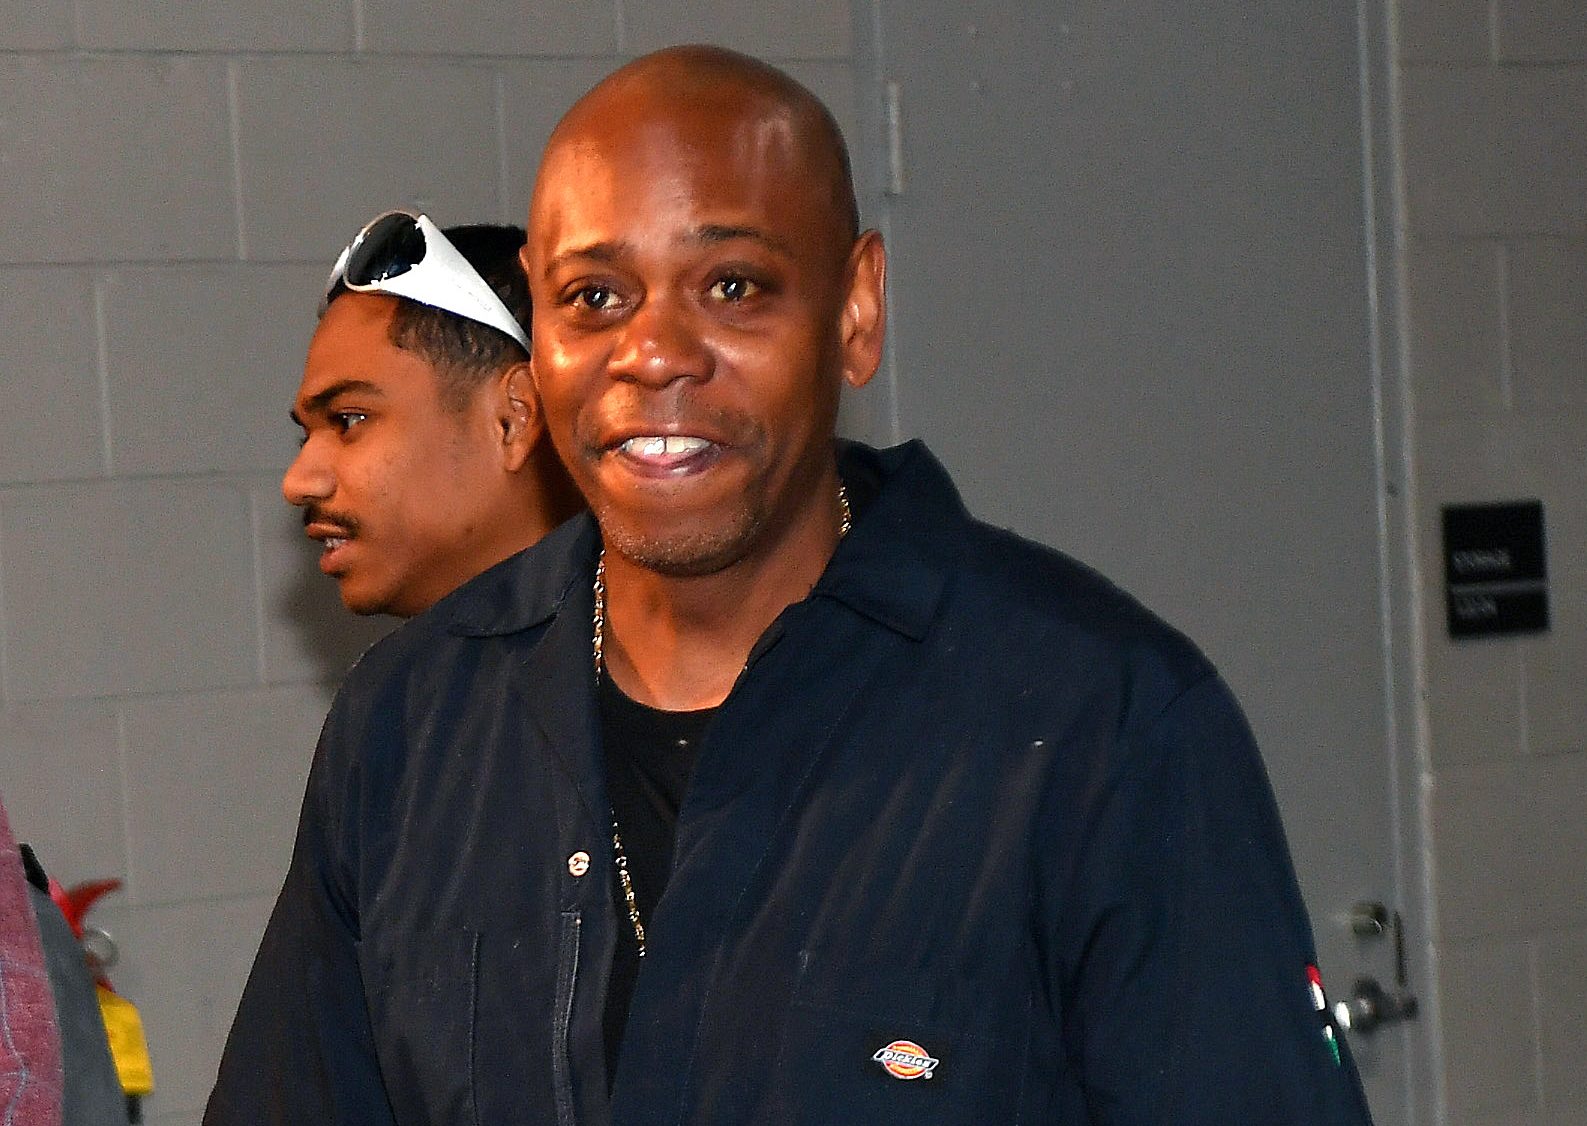 Dave Chappelle Returns To High School Alma Mater Amid ‘The Closer’ Controversy